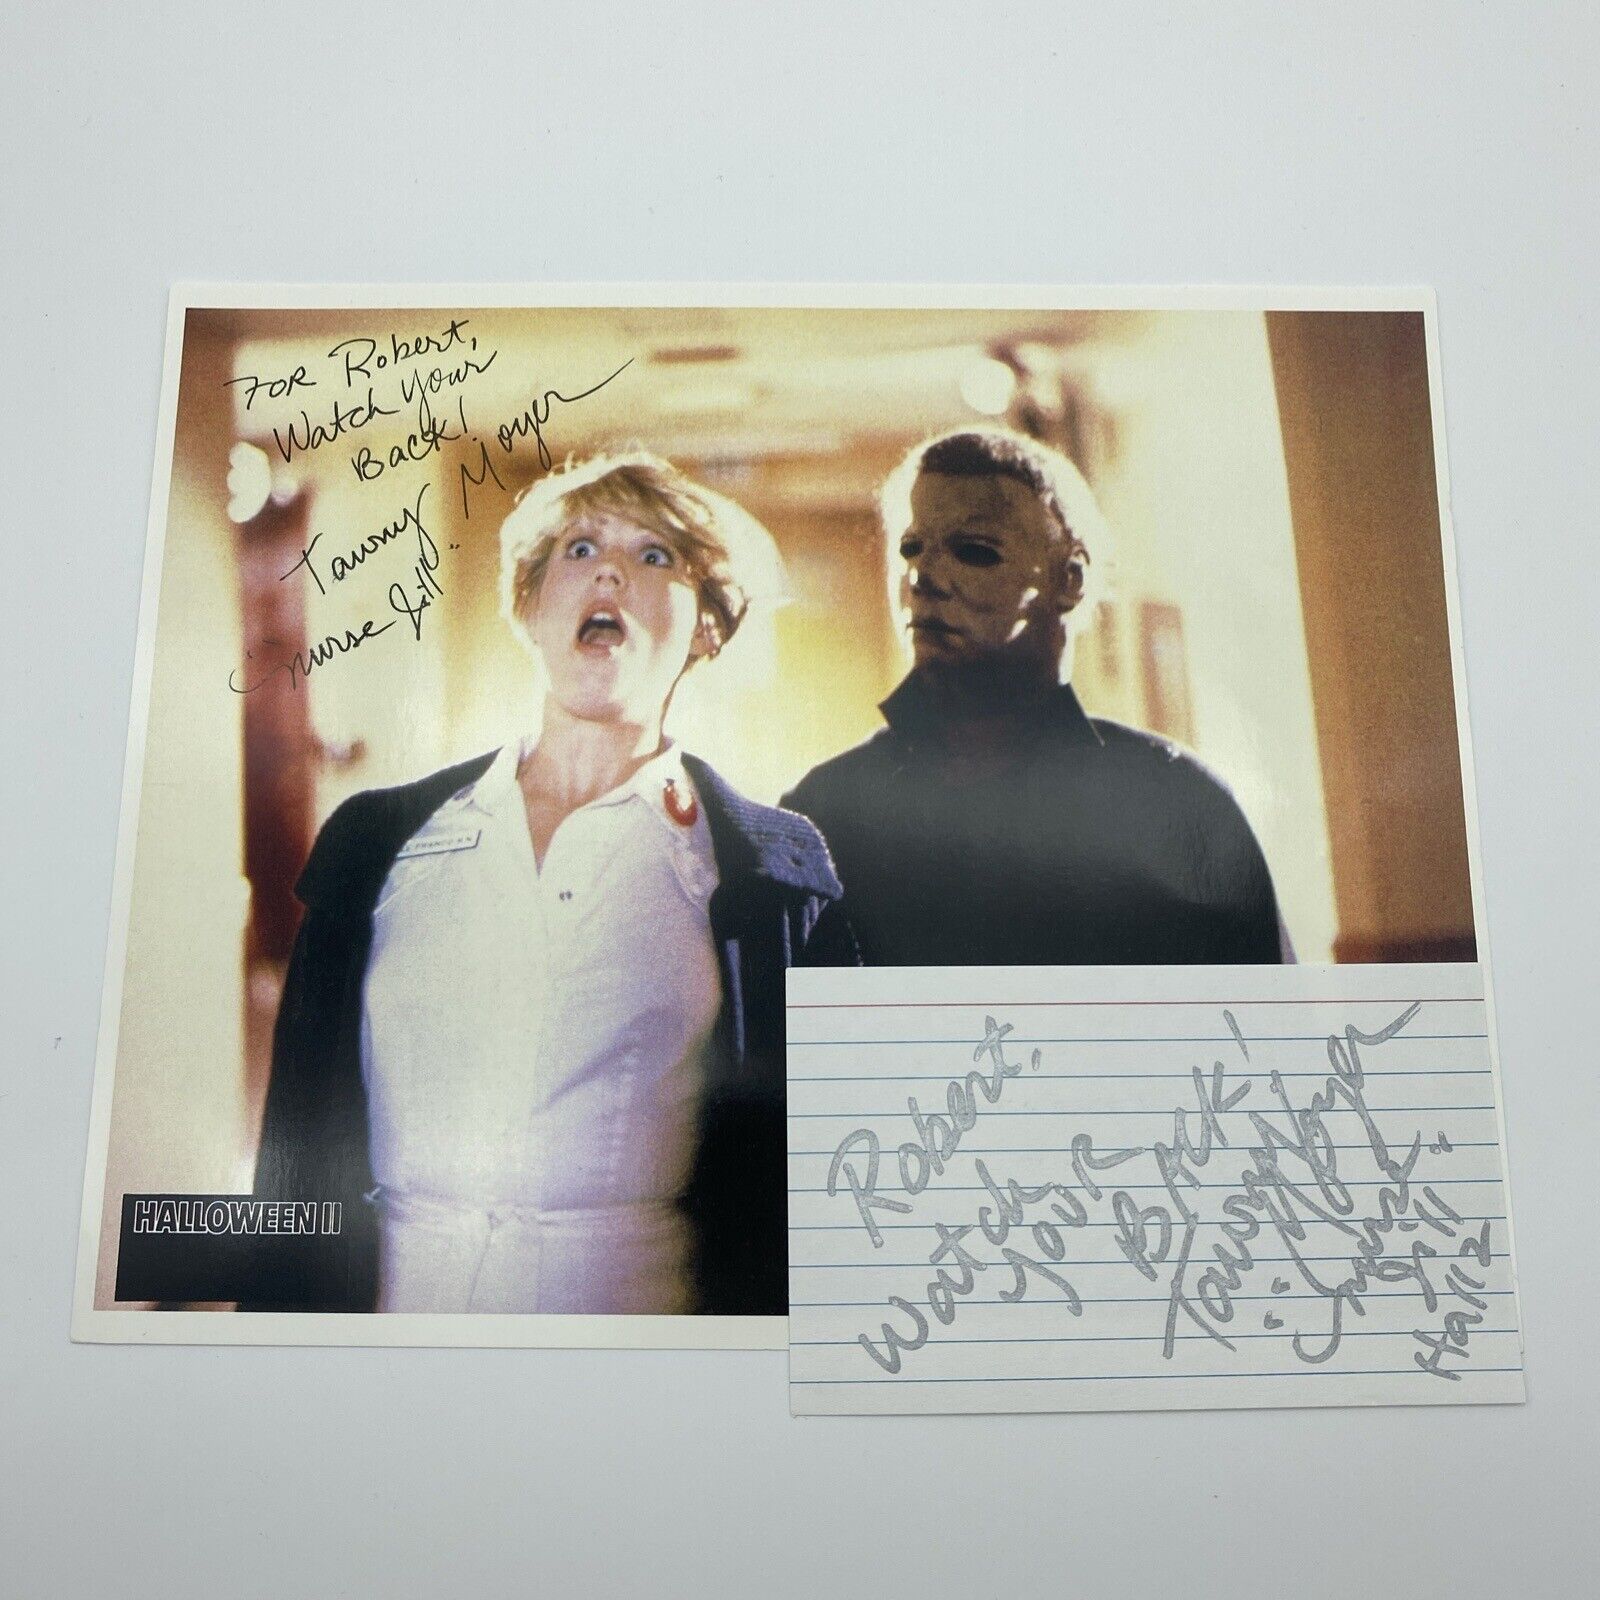 Tawny Moyer signed autographed 8x10 photo & Index Card Nurse Jill in Halloween 2